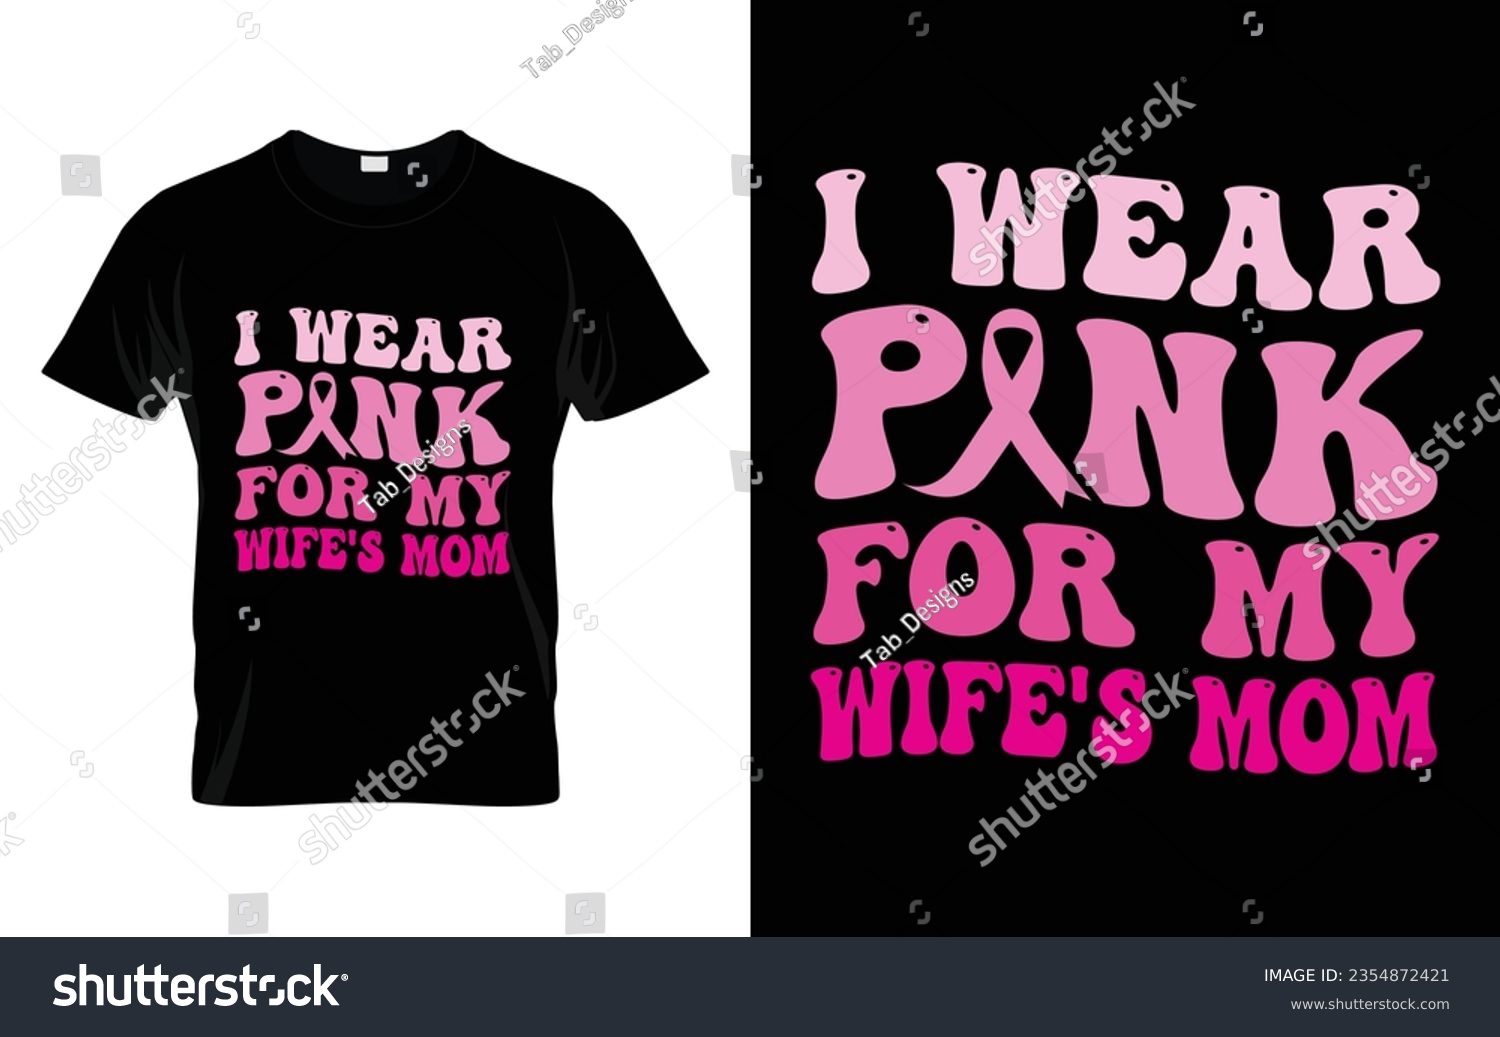 SVG of I wear pink for my Wife's Mom pink ribbon Groovy Breast Cancer Awareness Month T shirt Design || Breast Cancer Awareness Groovy t shirt design. svg